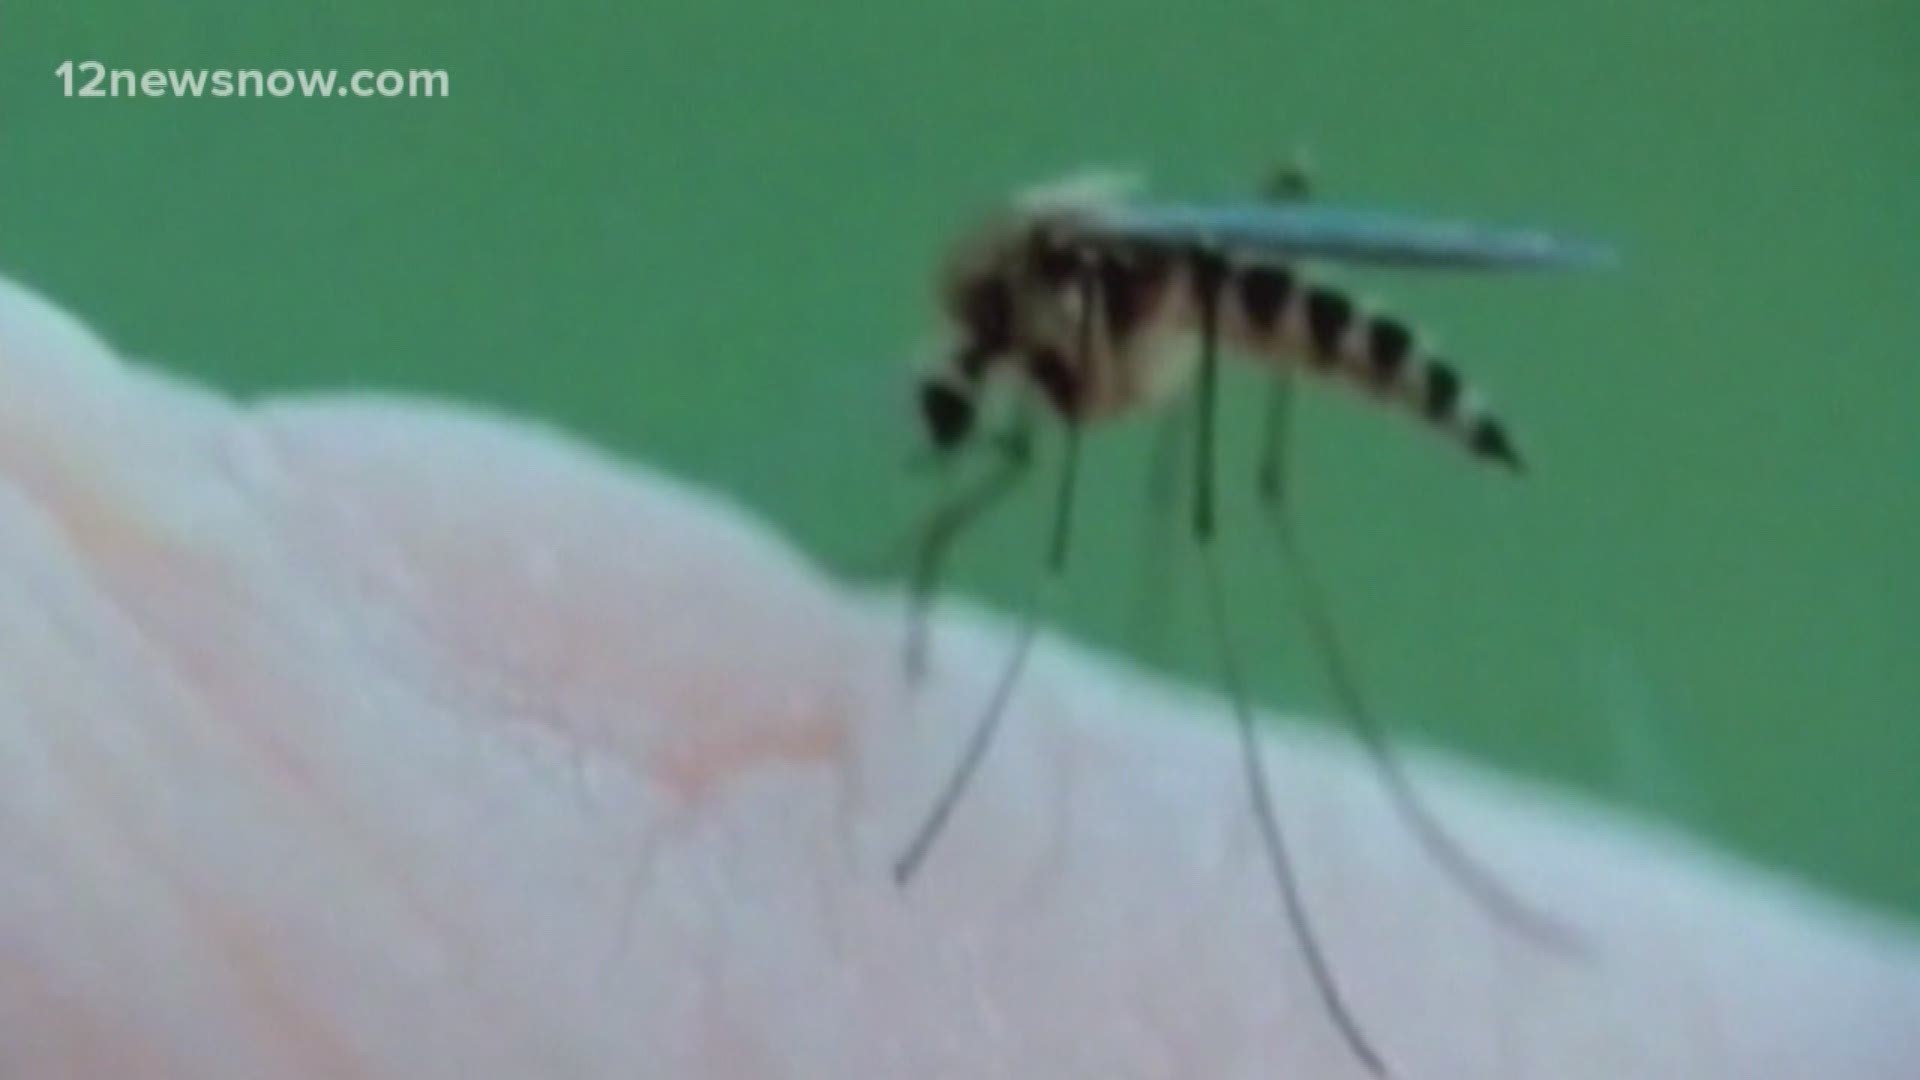 West Nile positve mosquitos found in Beaumont area